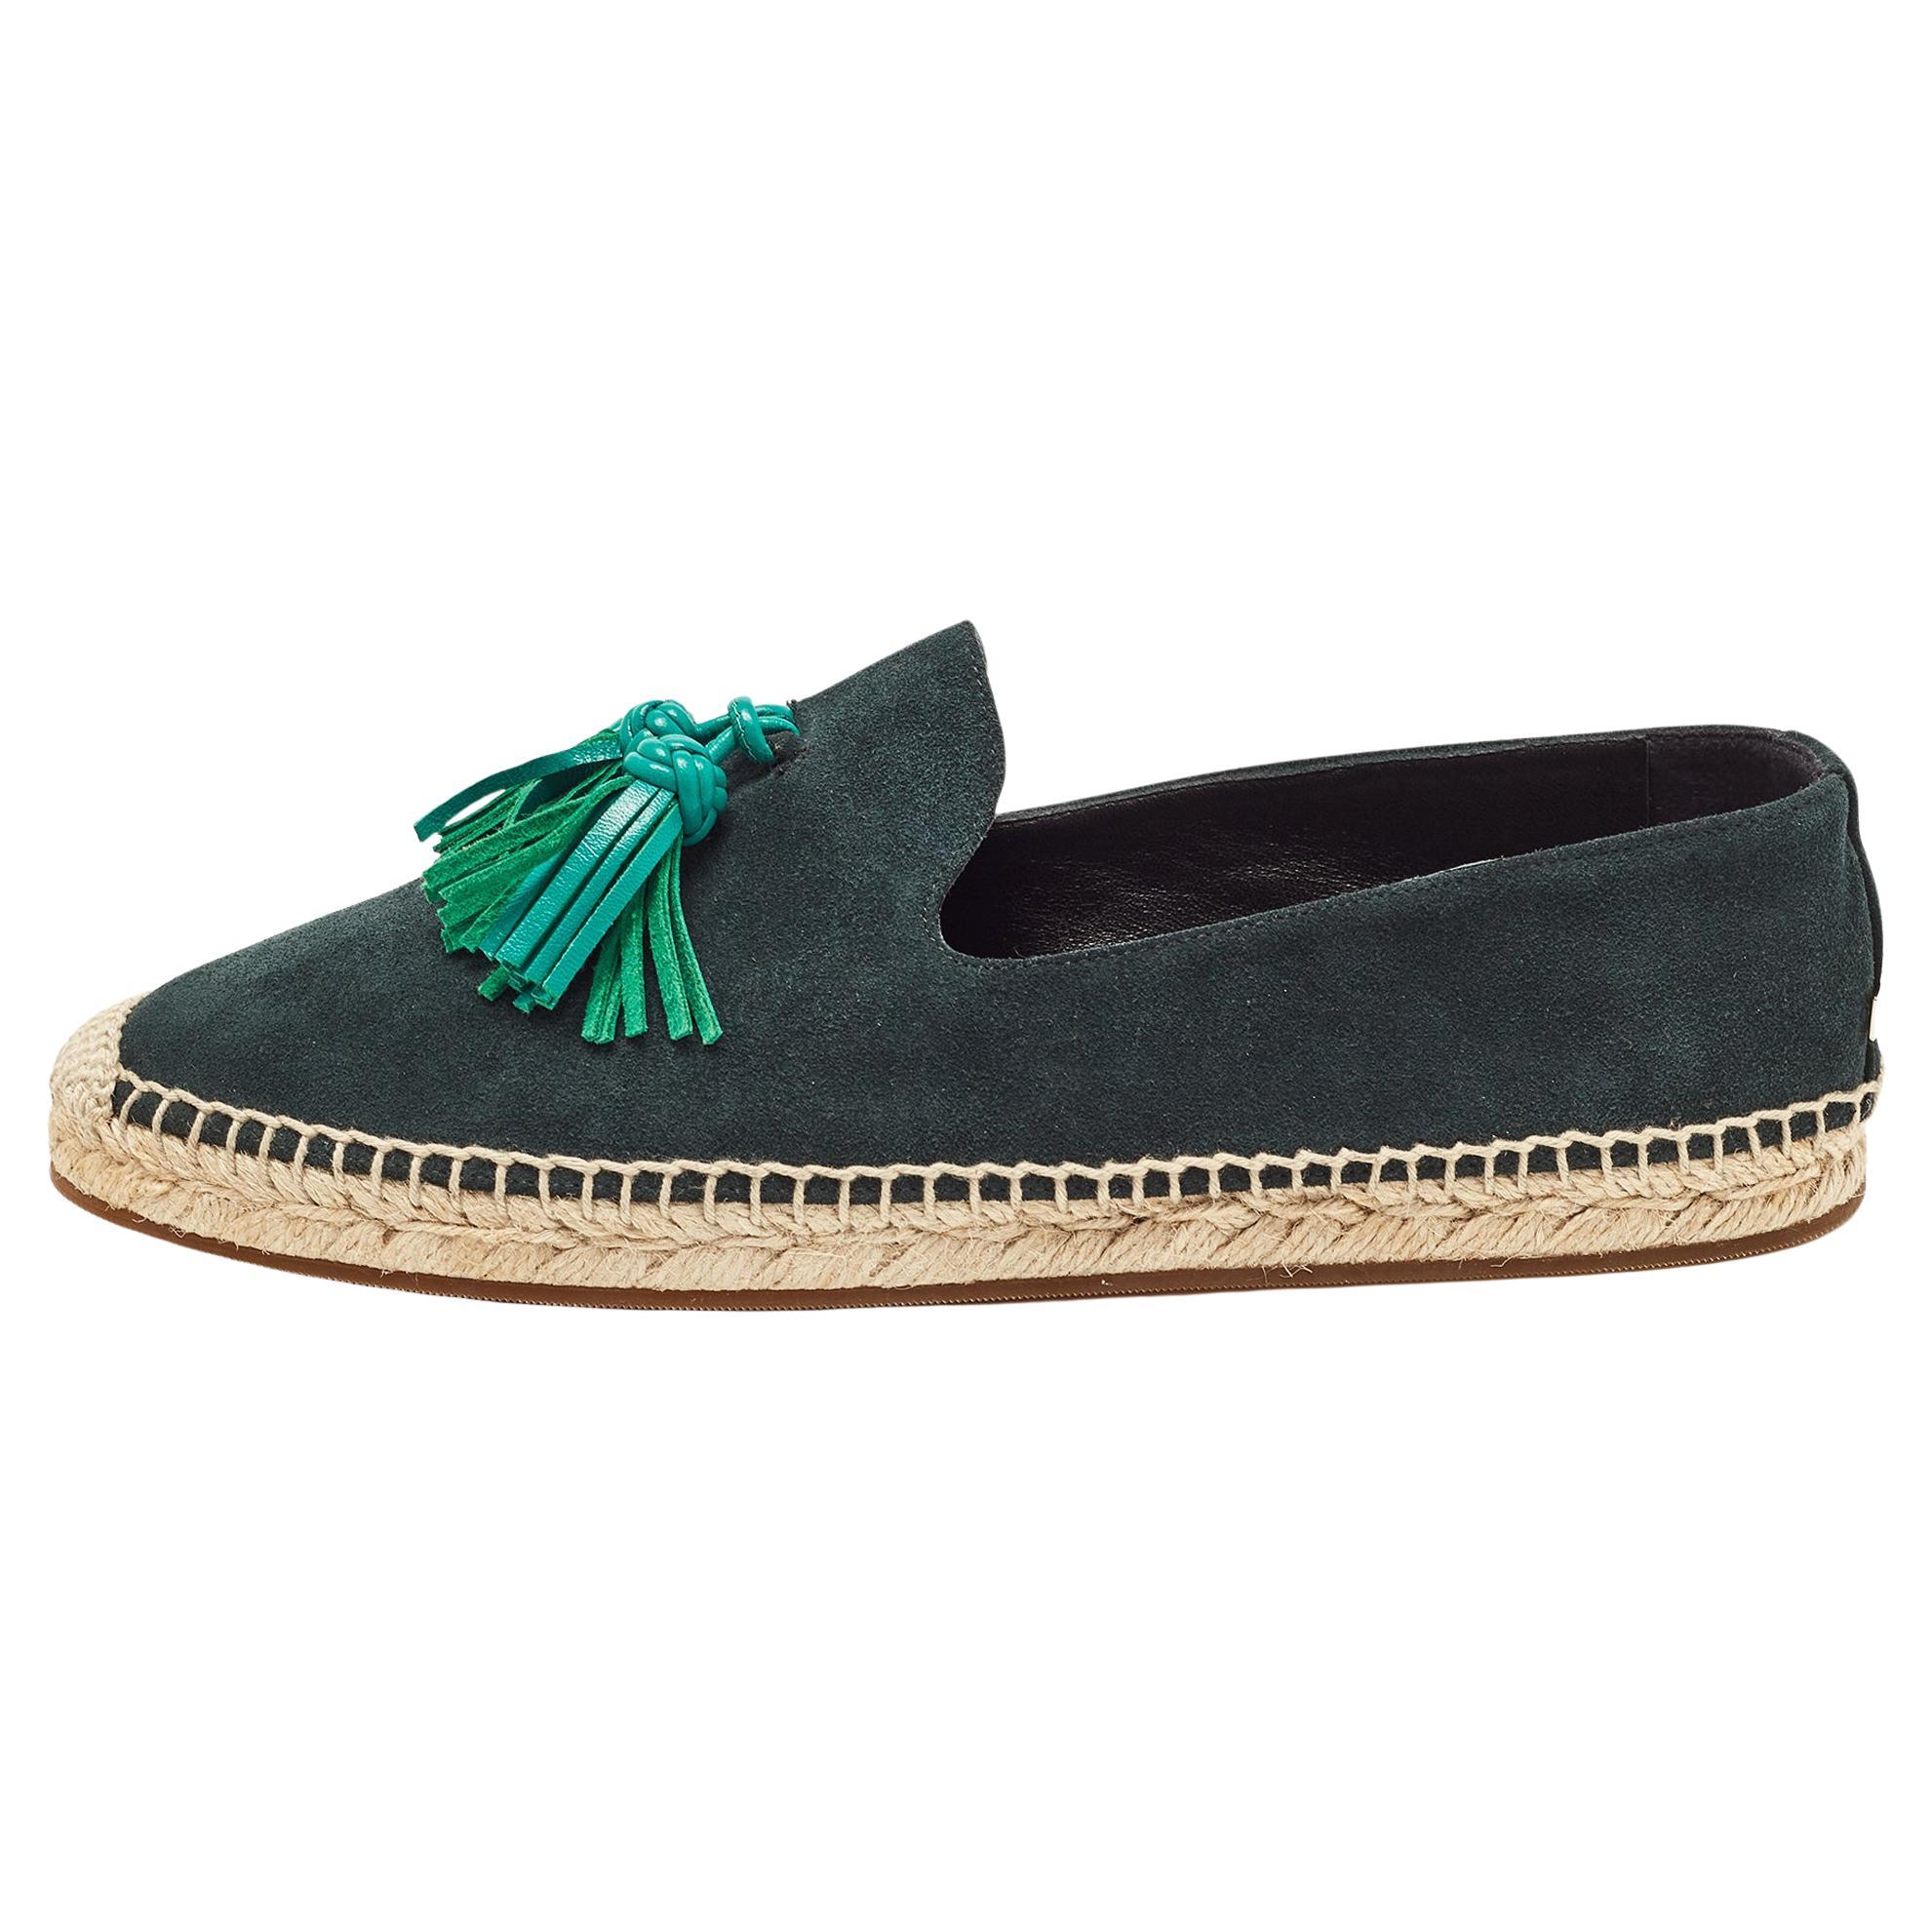 Burberry Green Suede Tassel Espadrille Flats Size 40 For Sale